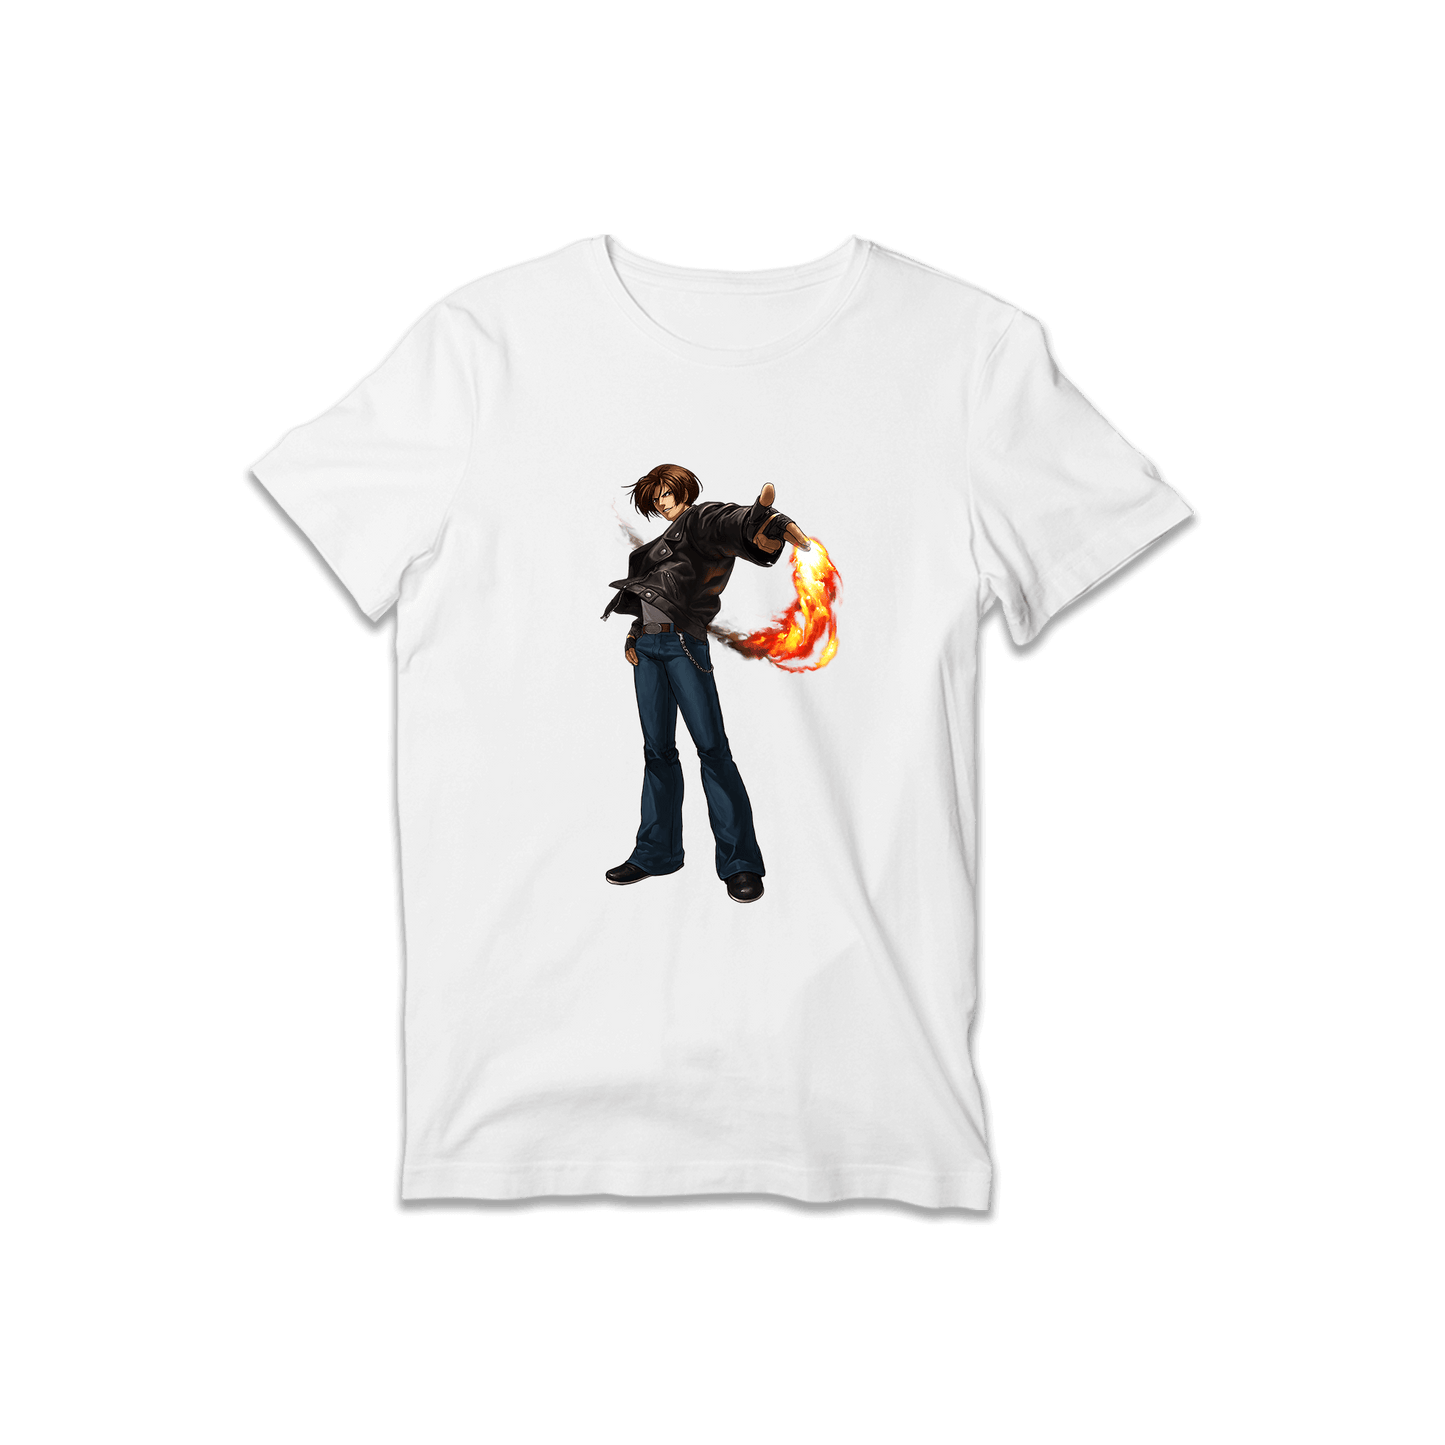 Kyu T-Shirt - The King of Fighters